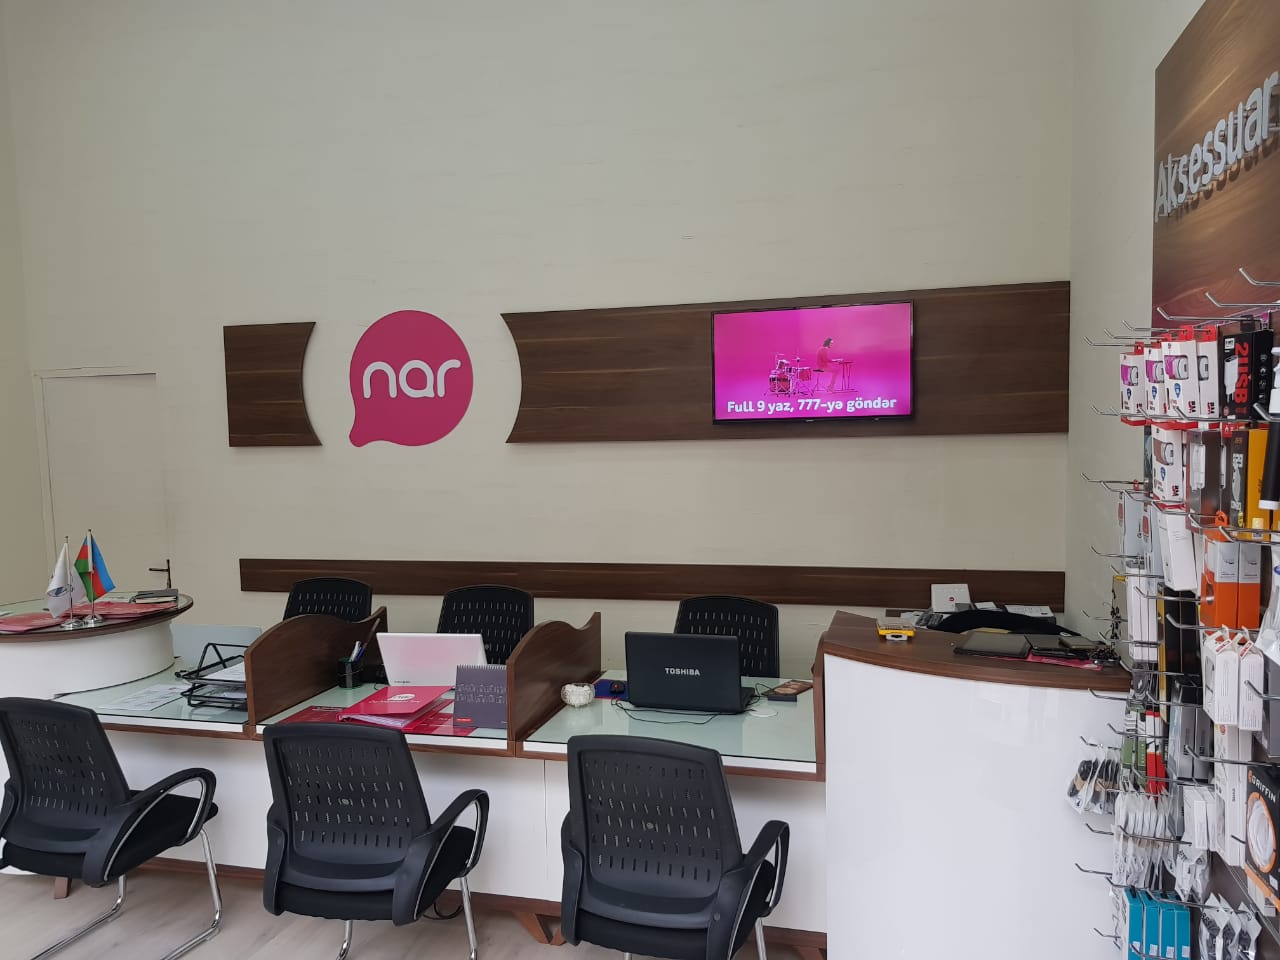 Nar presented its new official store in the capital